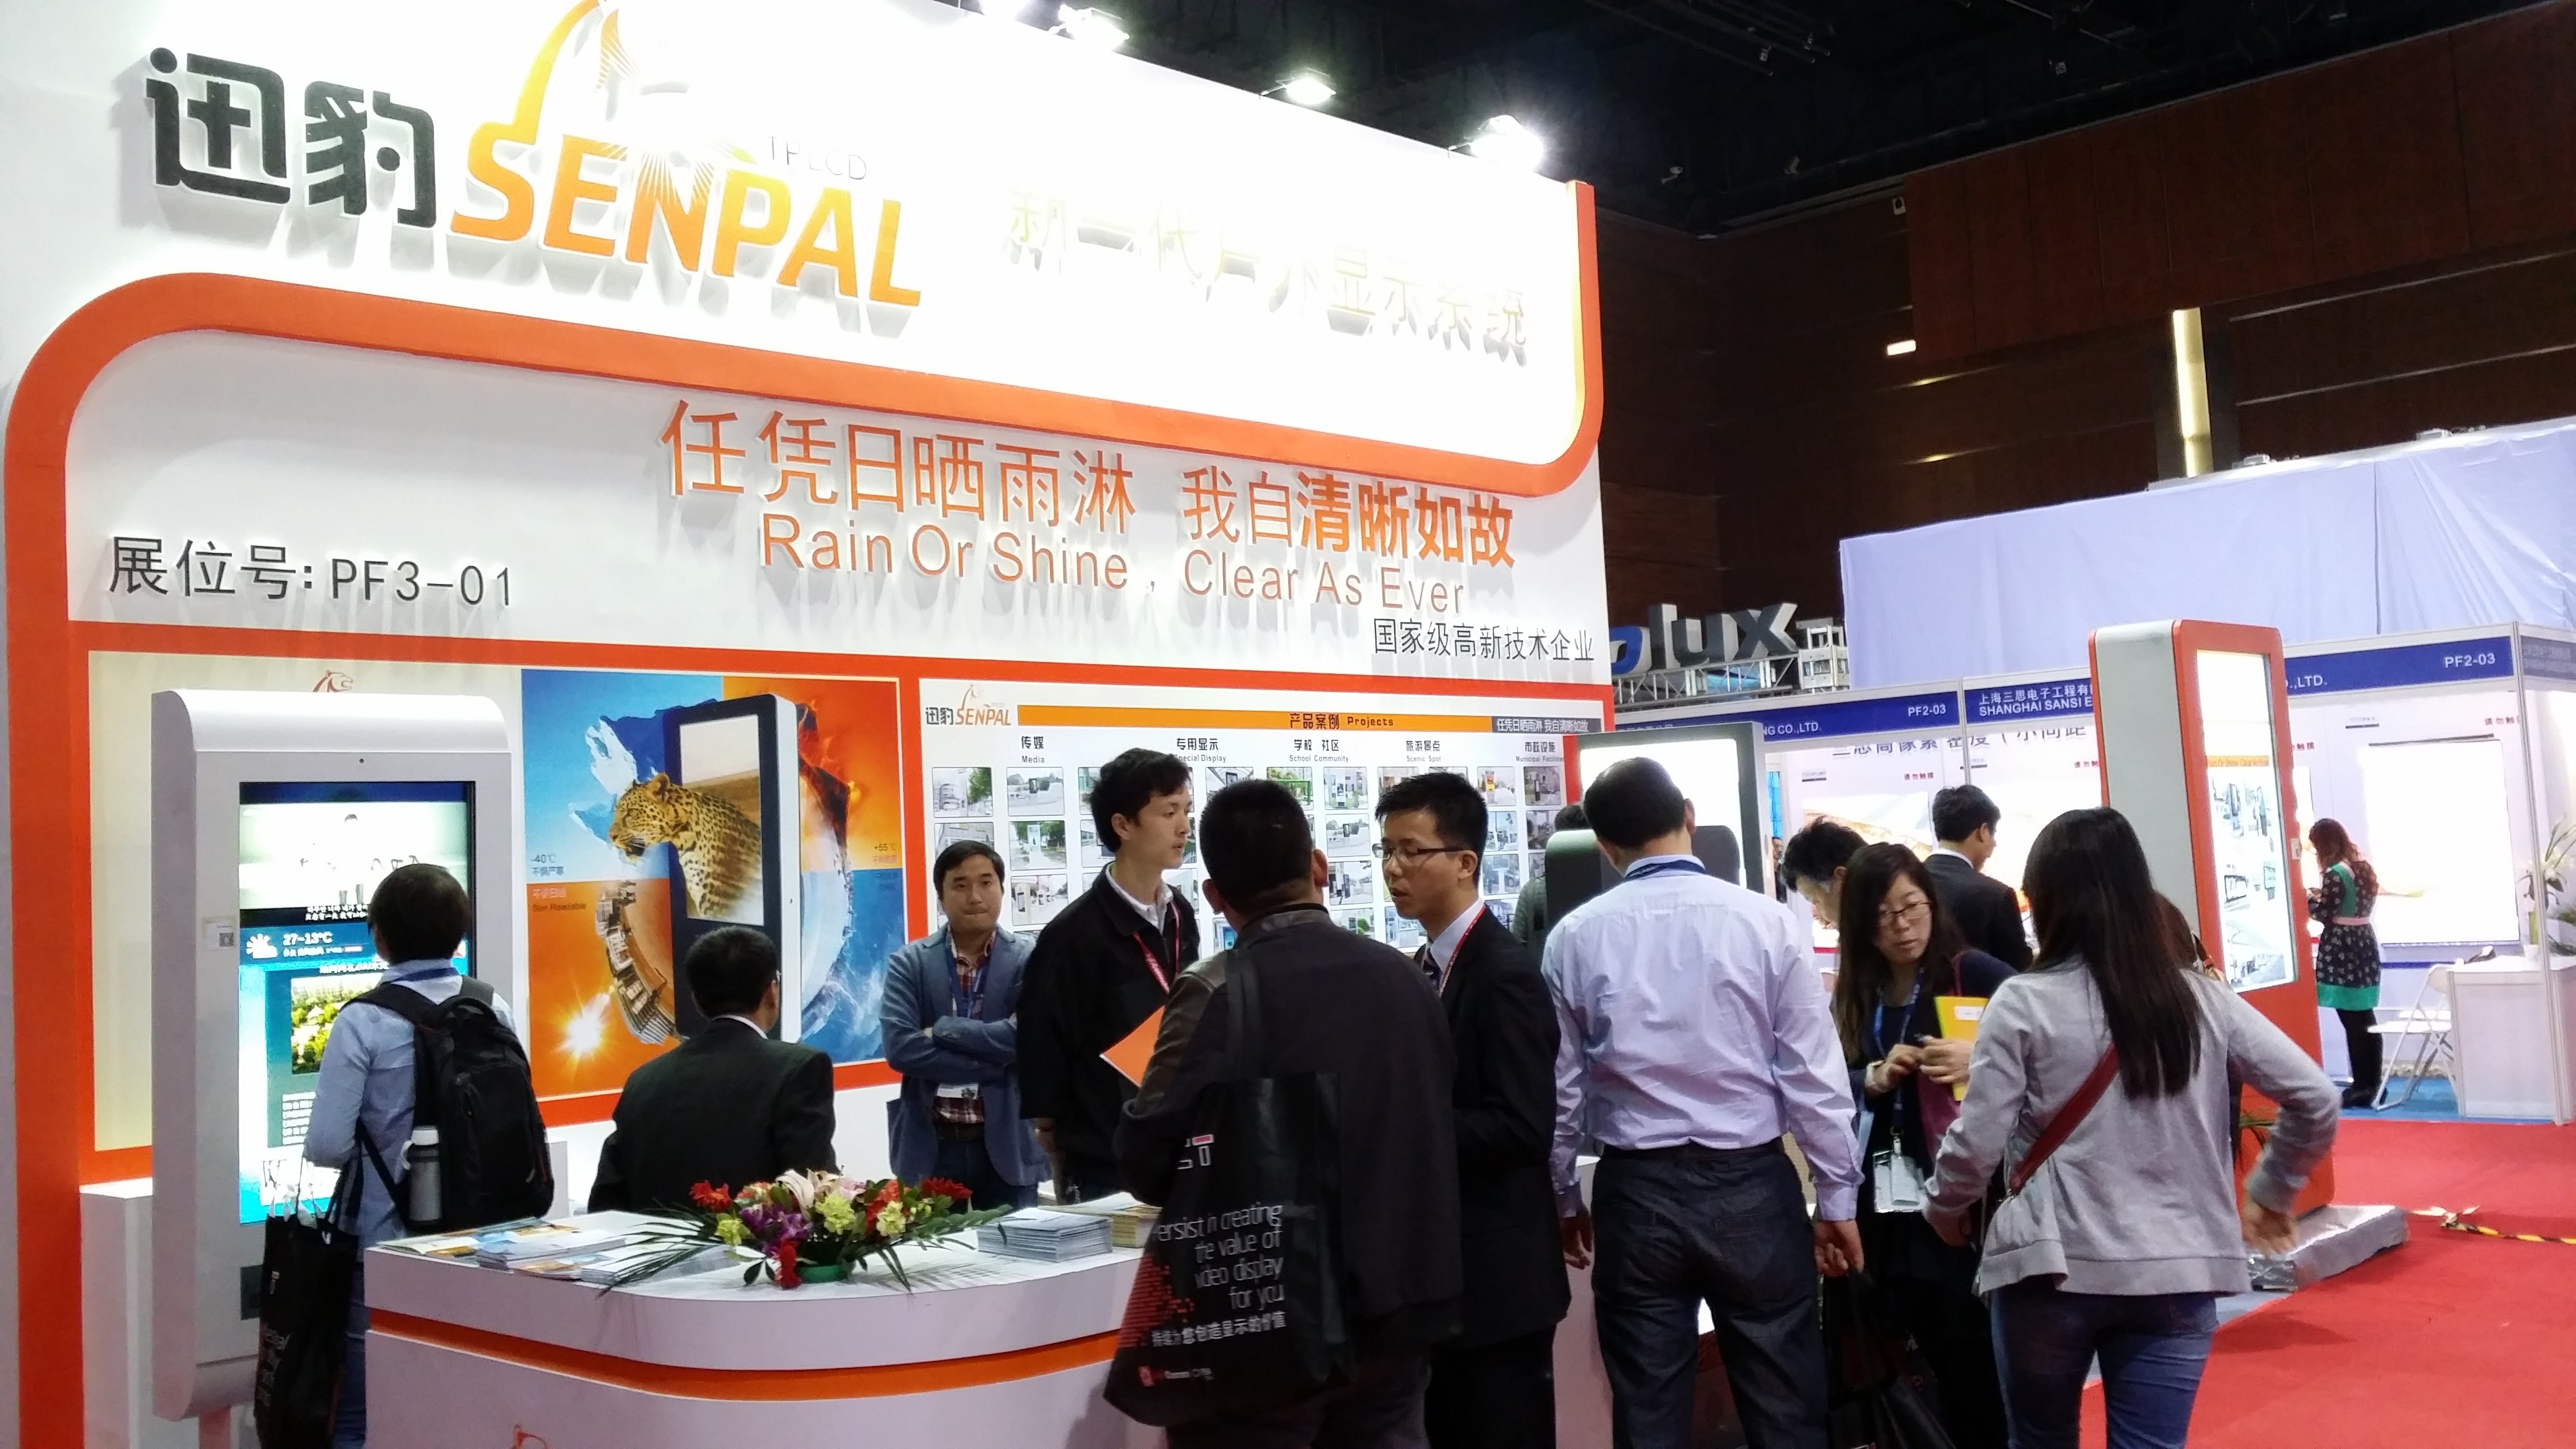 Senpal Technology Co. LTD will participate in the International Exhibition held in Las Vegas on April this year , welcome colleagues and customers to communicate.